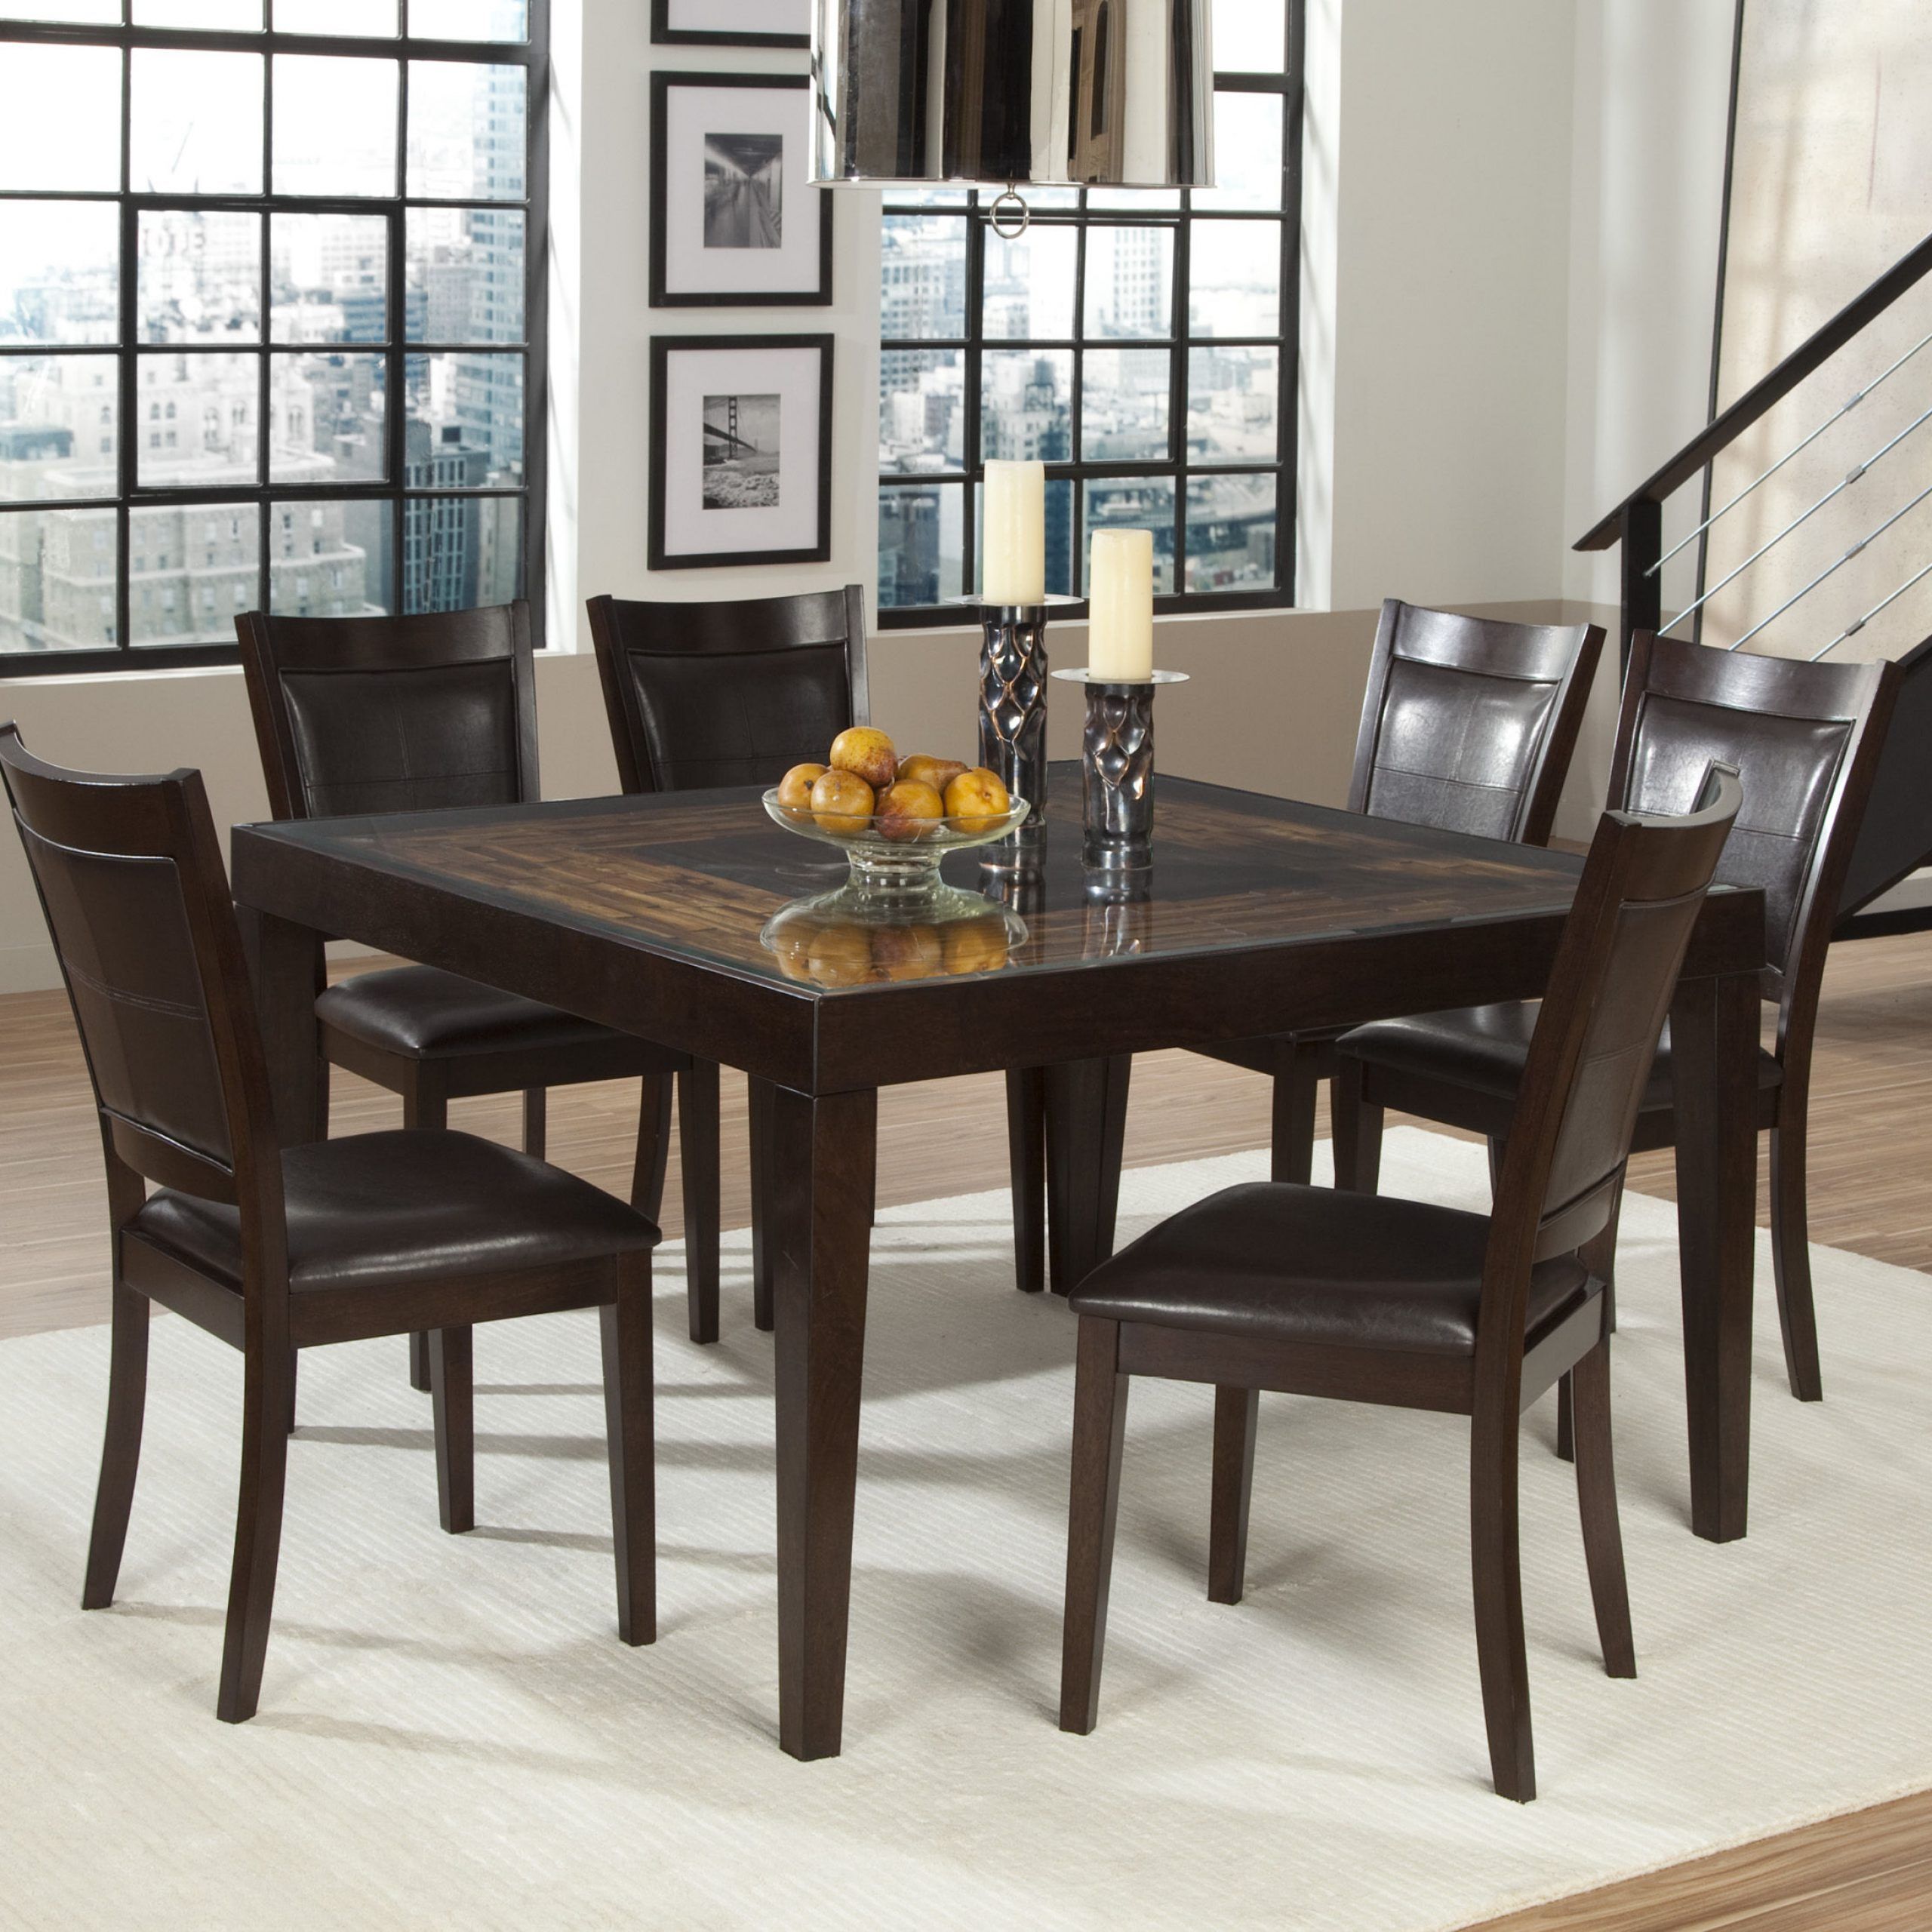 Vincent Chocolate/Dark Brown Wood Dining Table | The Throughout Most Recent Dark Hazelnut Dining Tables (View 1 of 15)